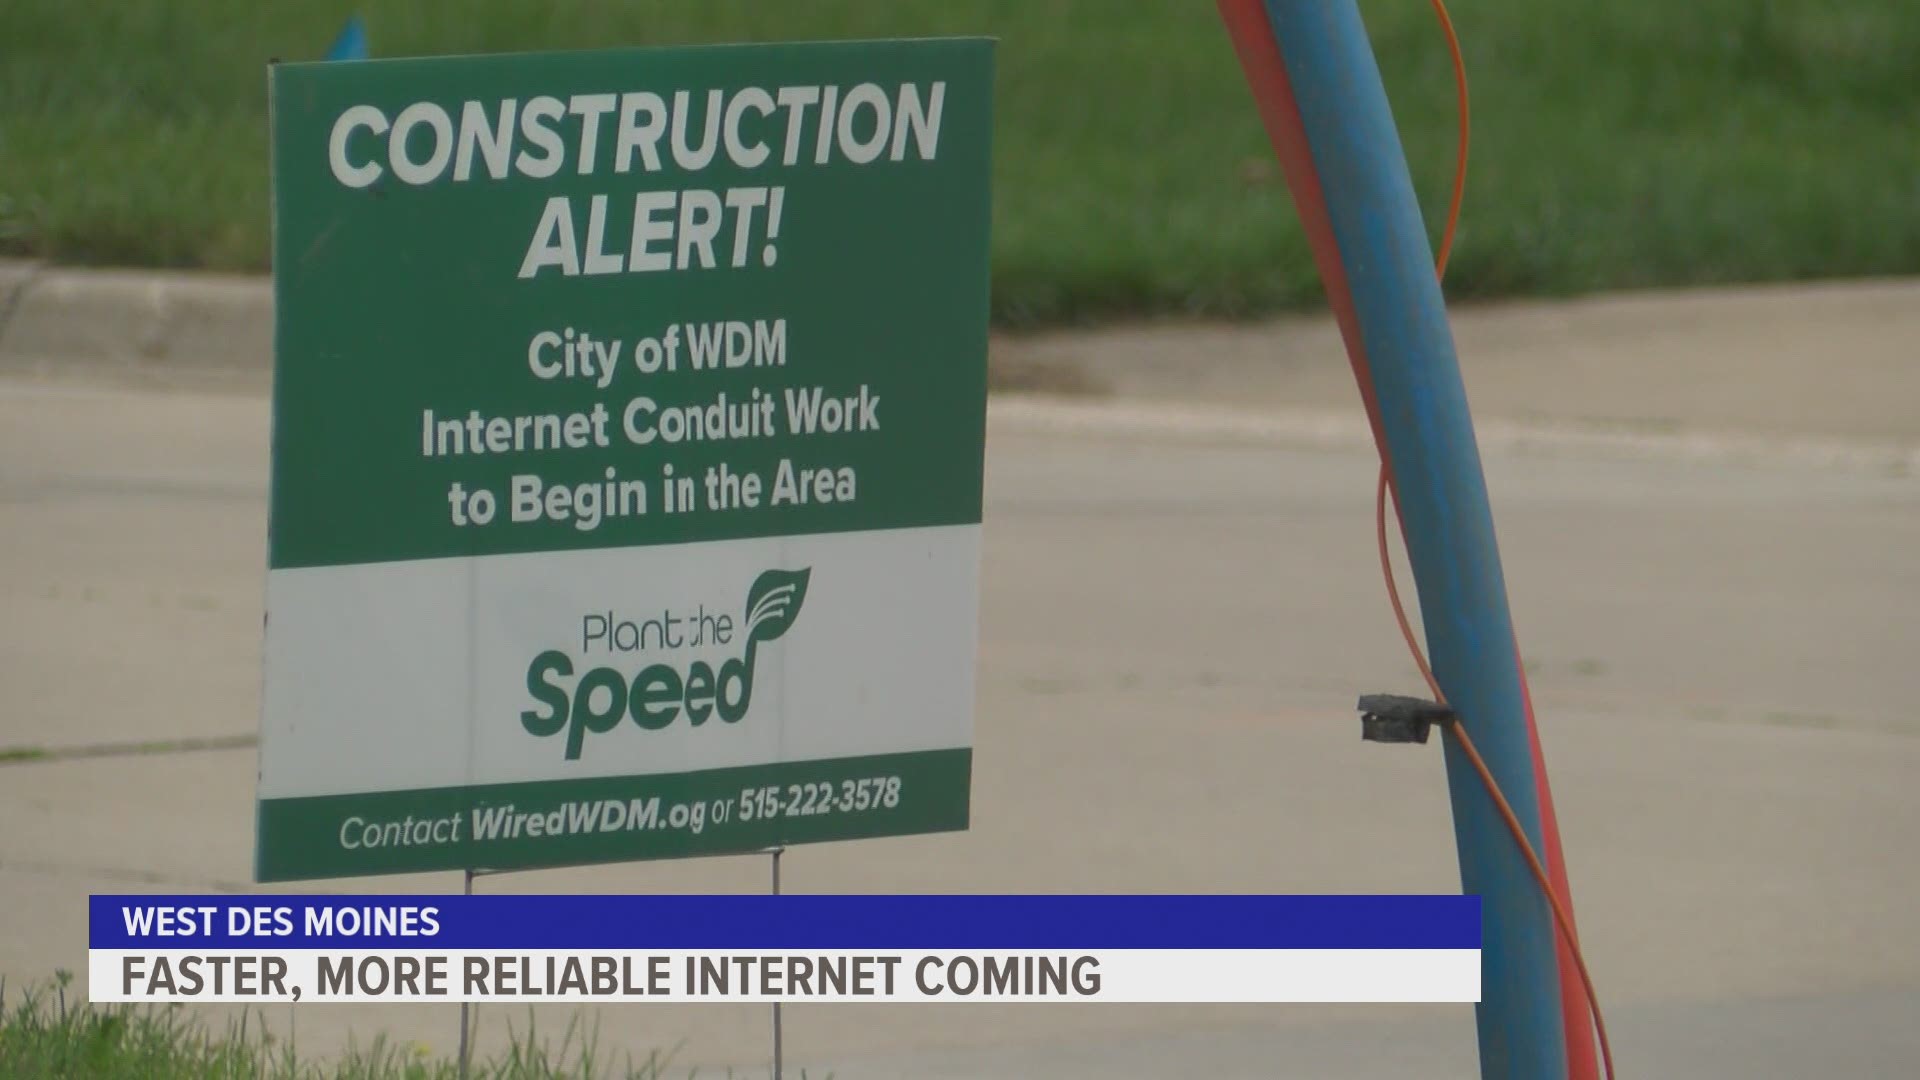 The city is building infrastructure that'll house Google Fiber, which will be available to all parts of West Des Moines.